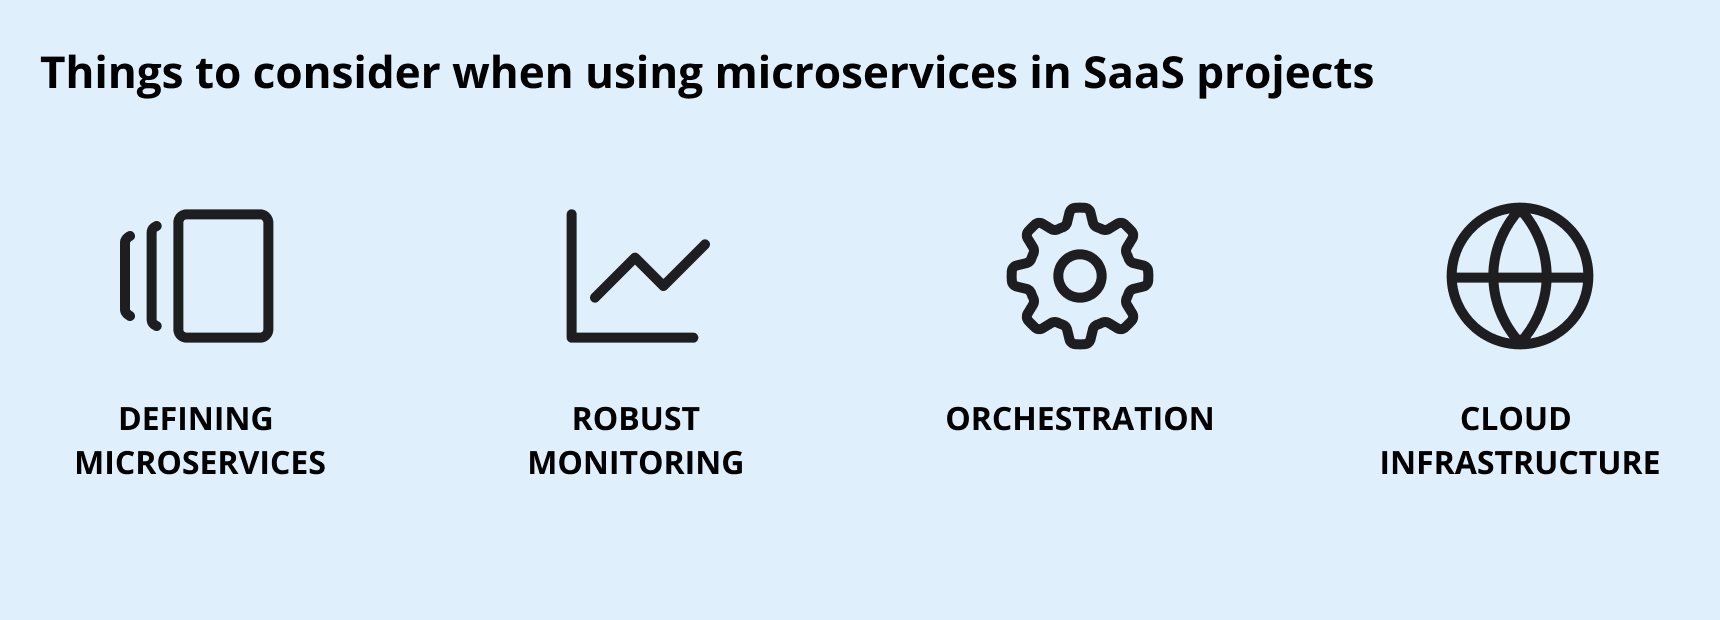 SaaS microservices challenges